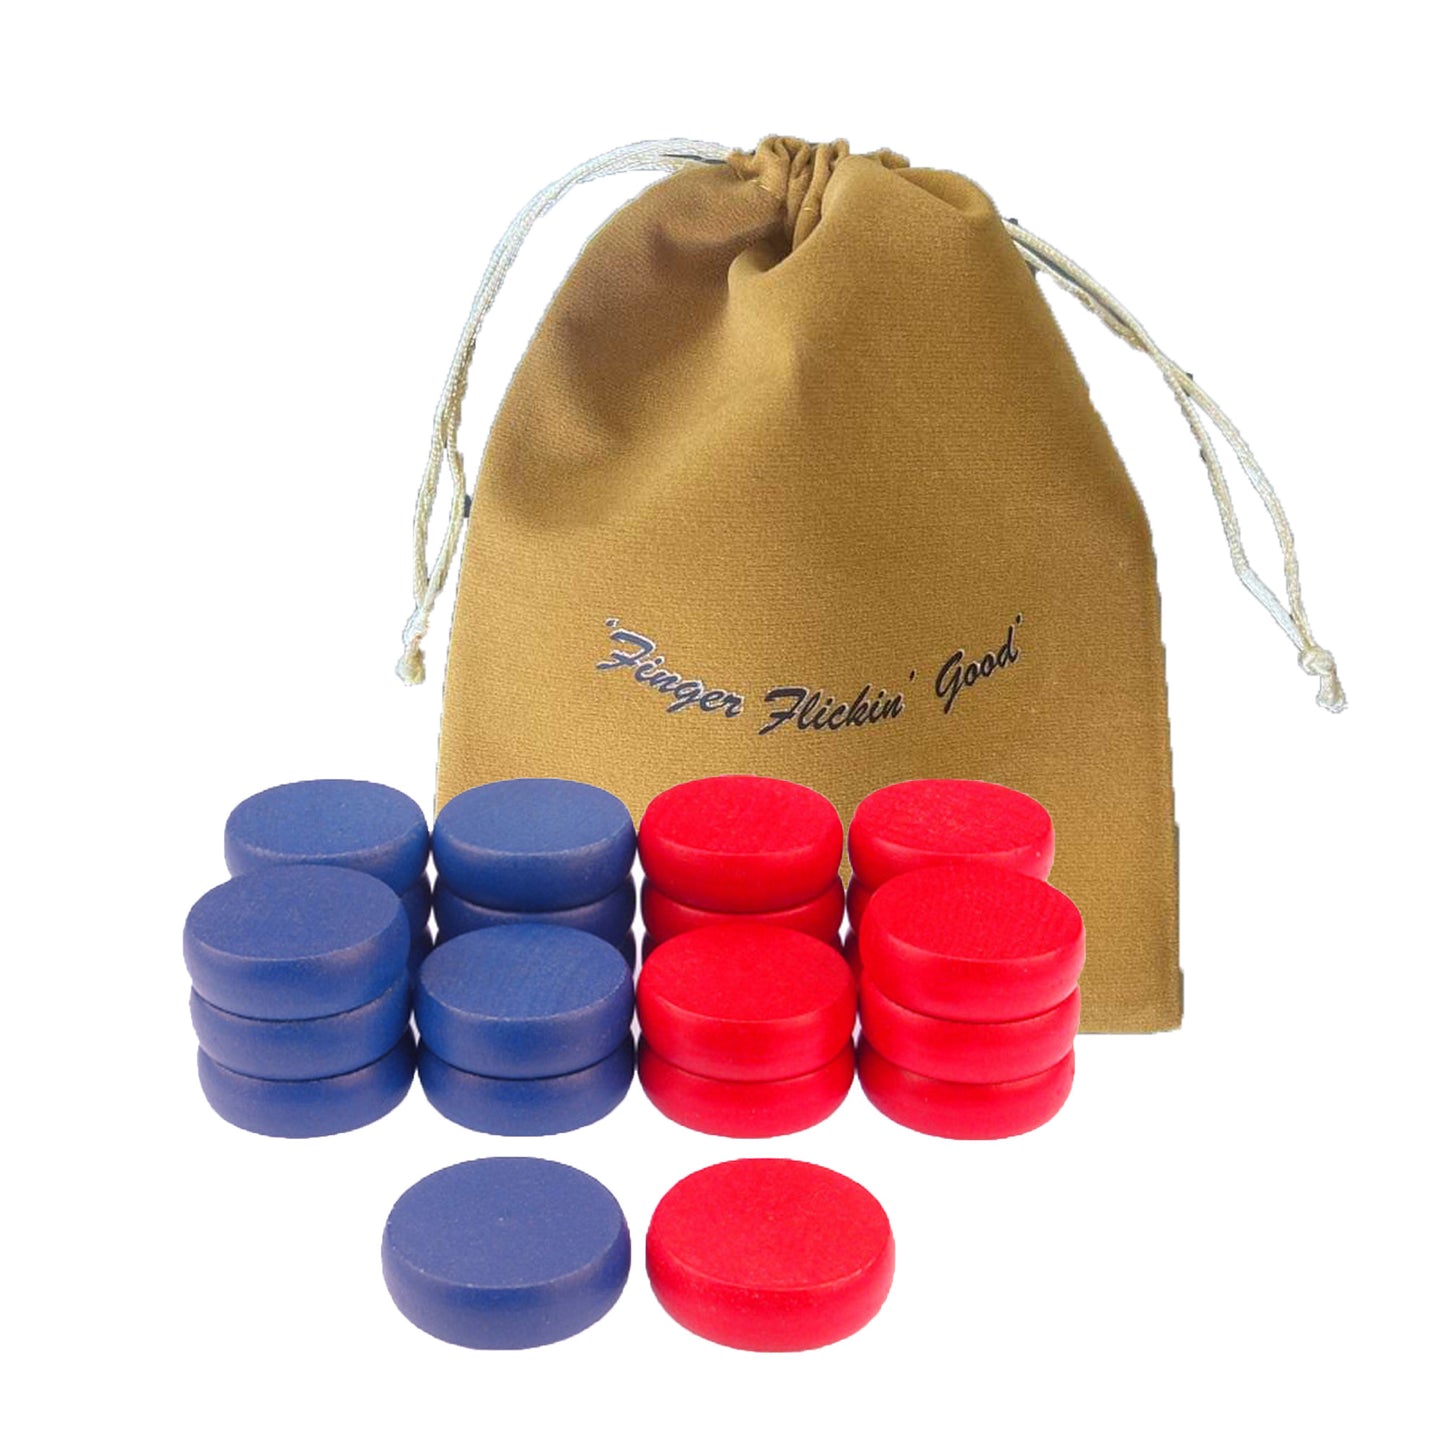 Crokinole Tournament Discs - 13 Blue and 13 Red - Size 1-1/4" - 24 Needed + 2 Spare Discs - Bag Included - Carrom Alternative